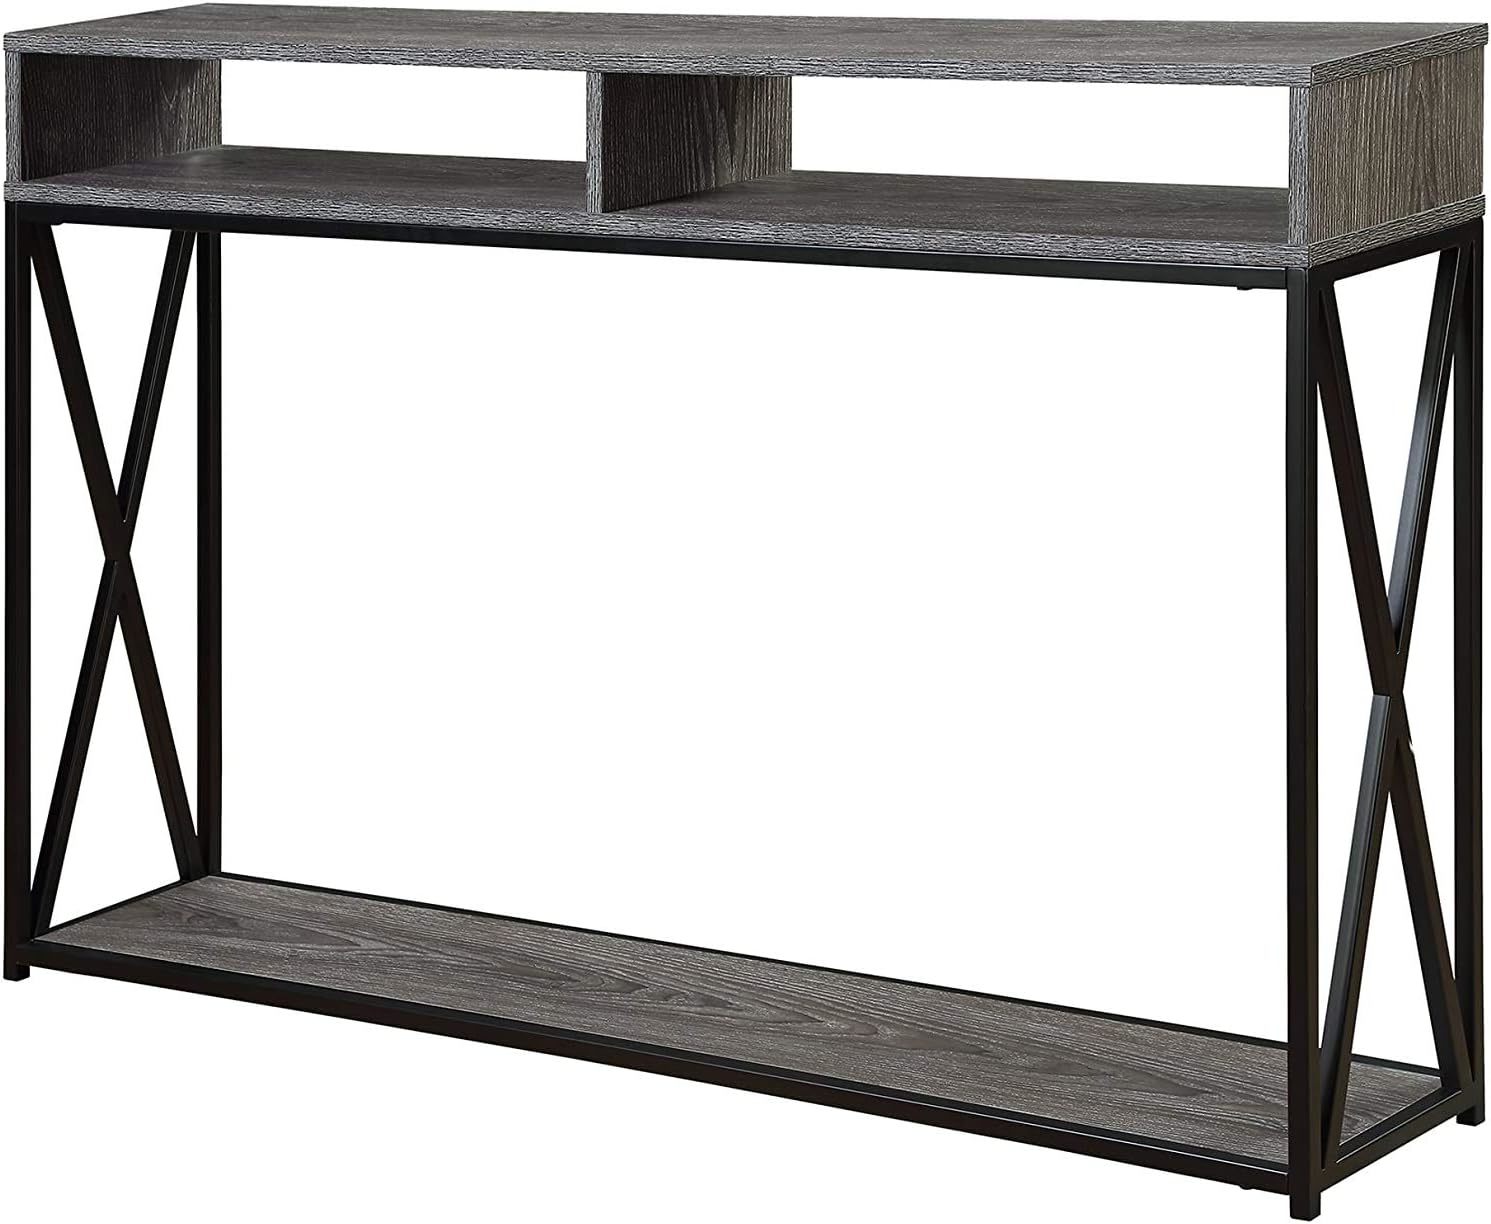 Tucson Deluxe 2 Tier Console Table, Weathered Gray / Black, By Convenience - $94.92